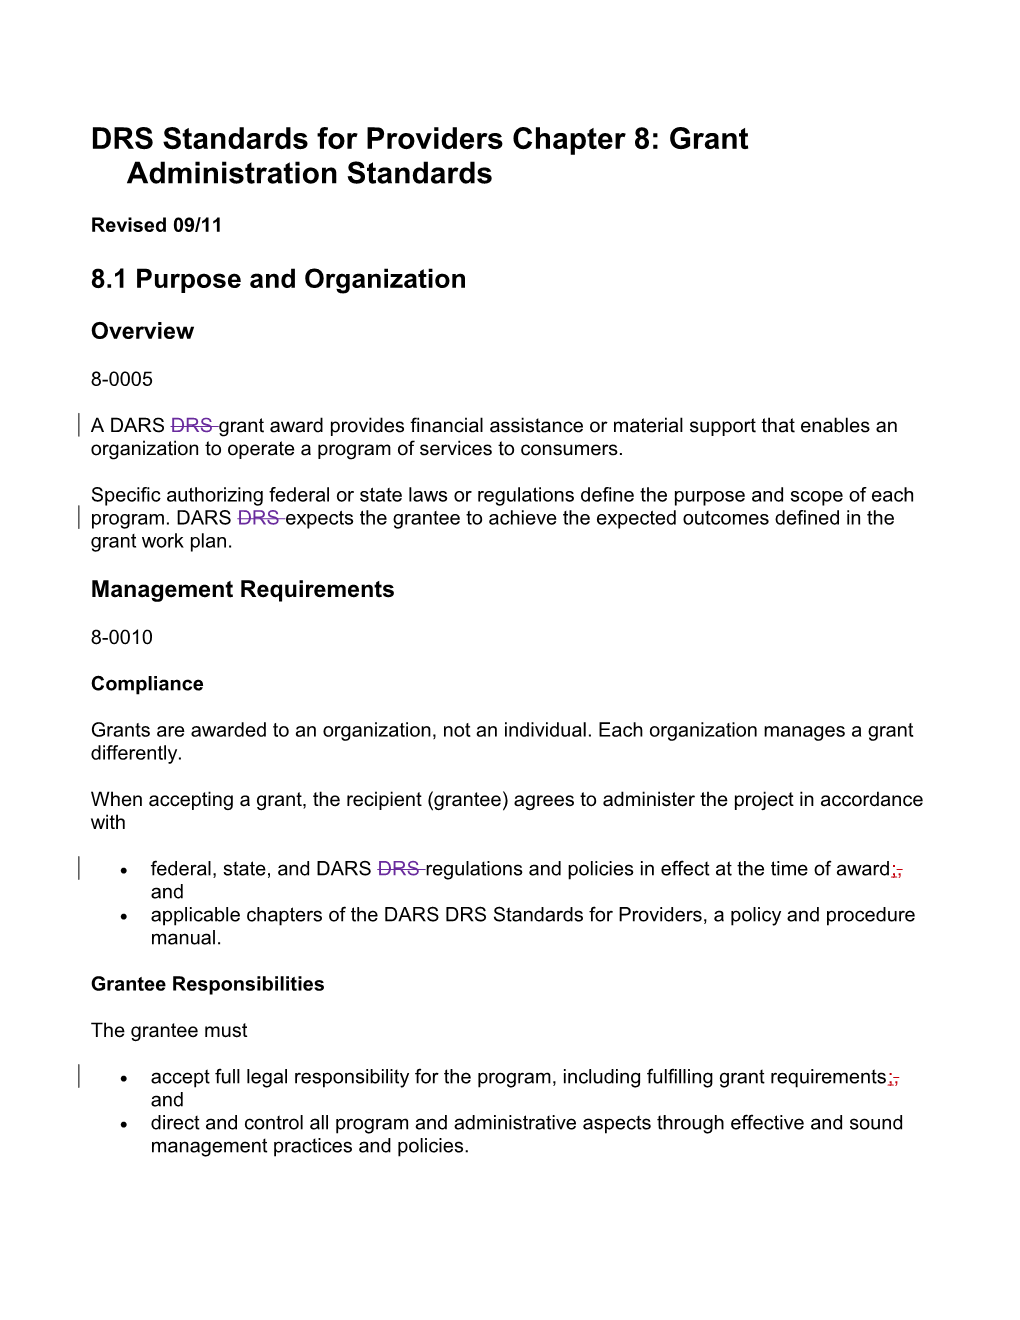 DARS DRS Standards for Providers Chapter 8 Revisions - September 2011